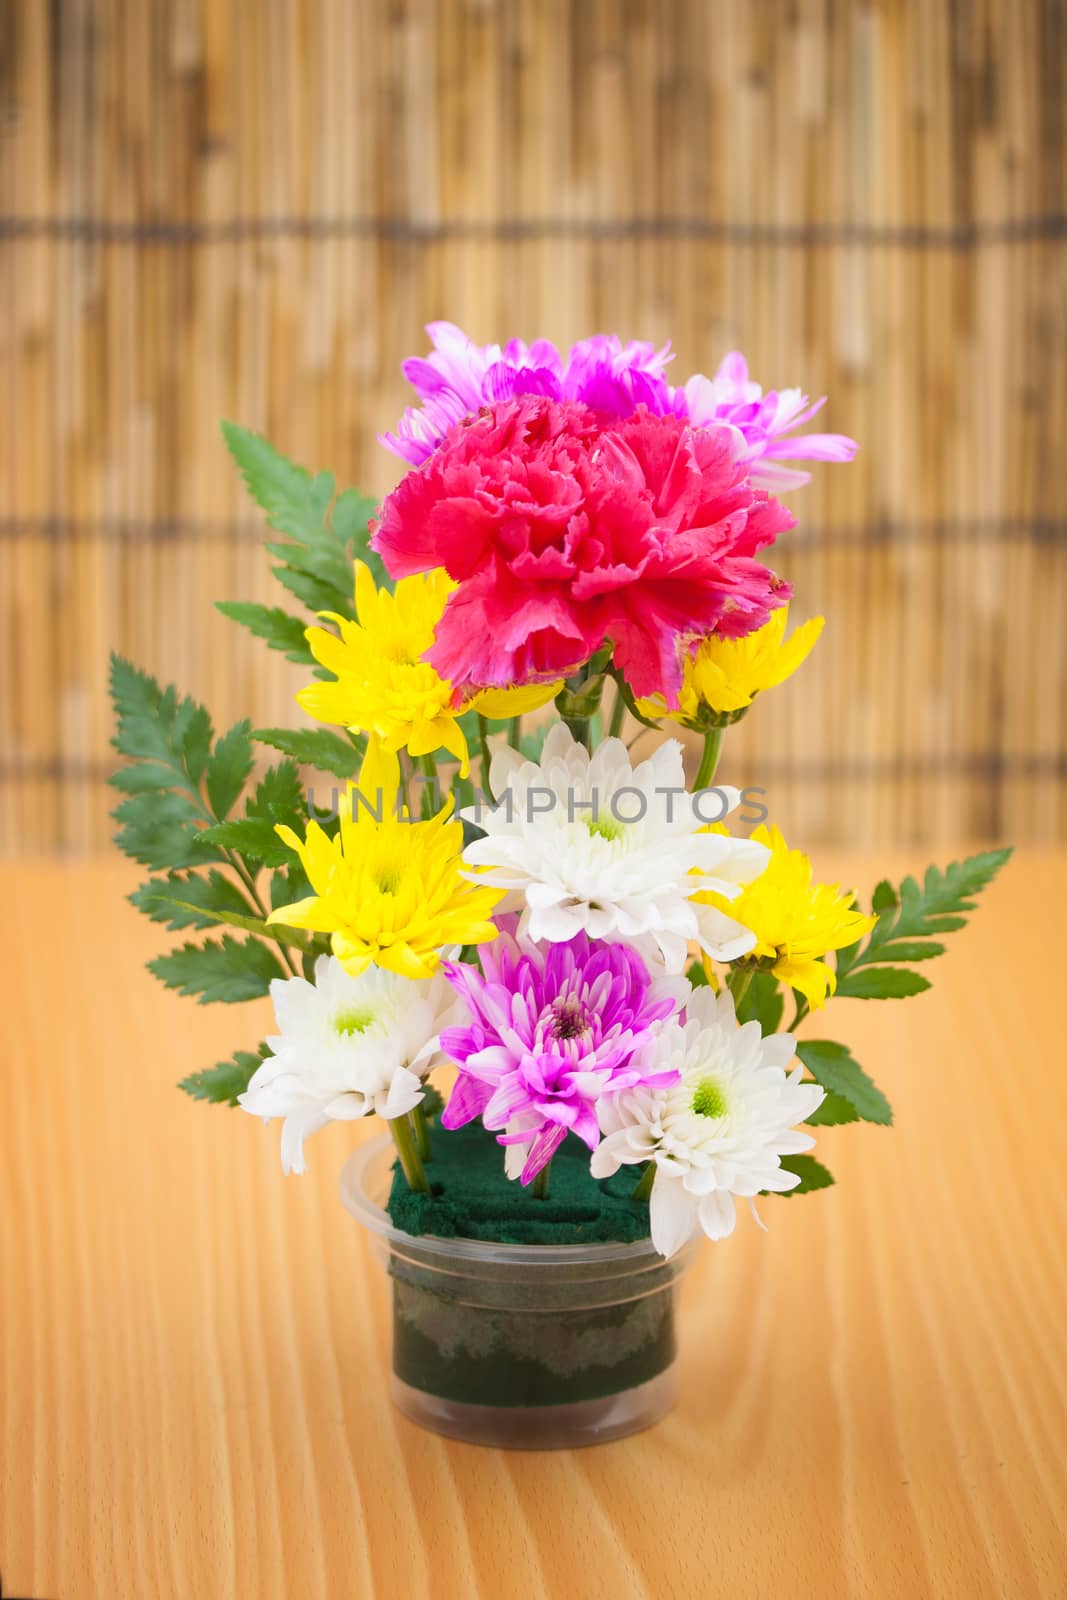 Colorful flower bouquet arrangement in vase on wood background by pkproject